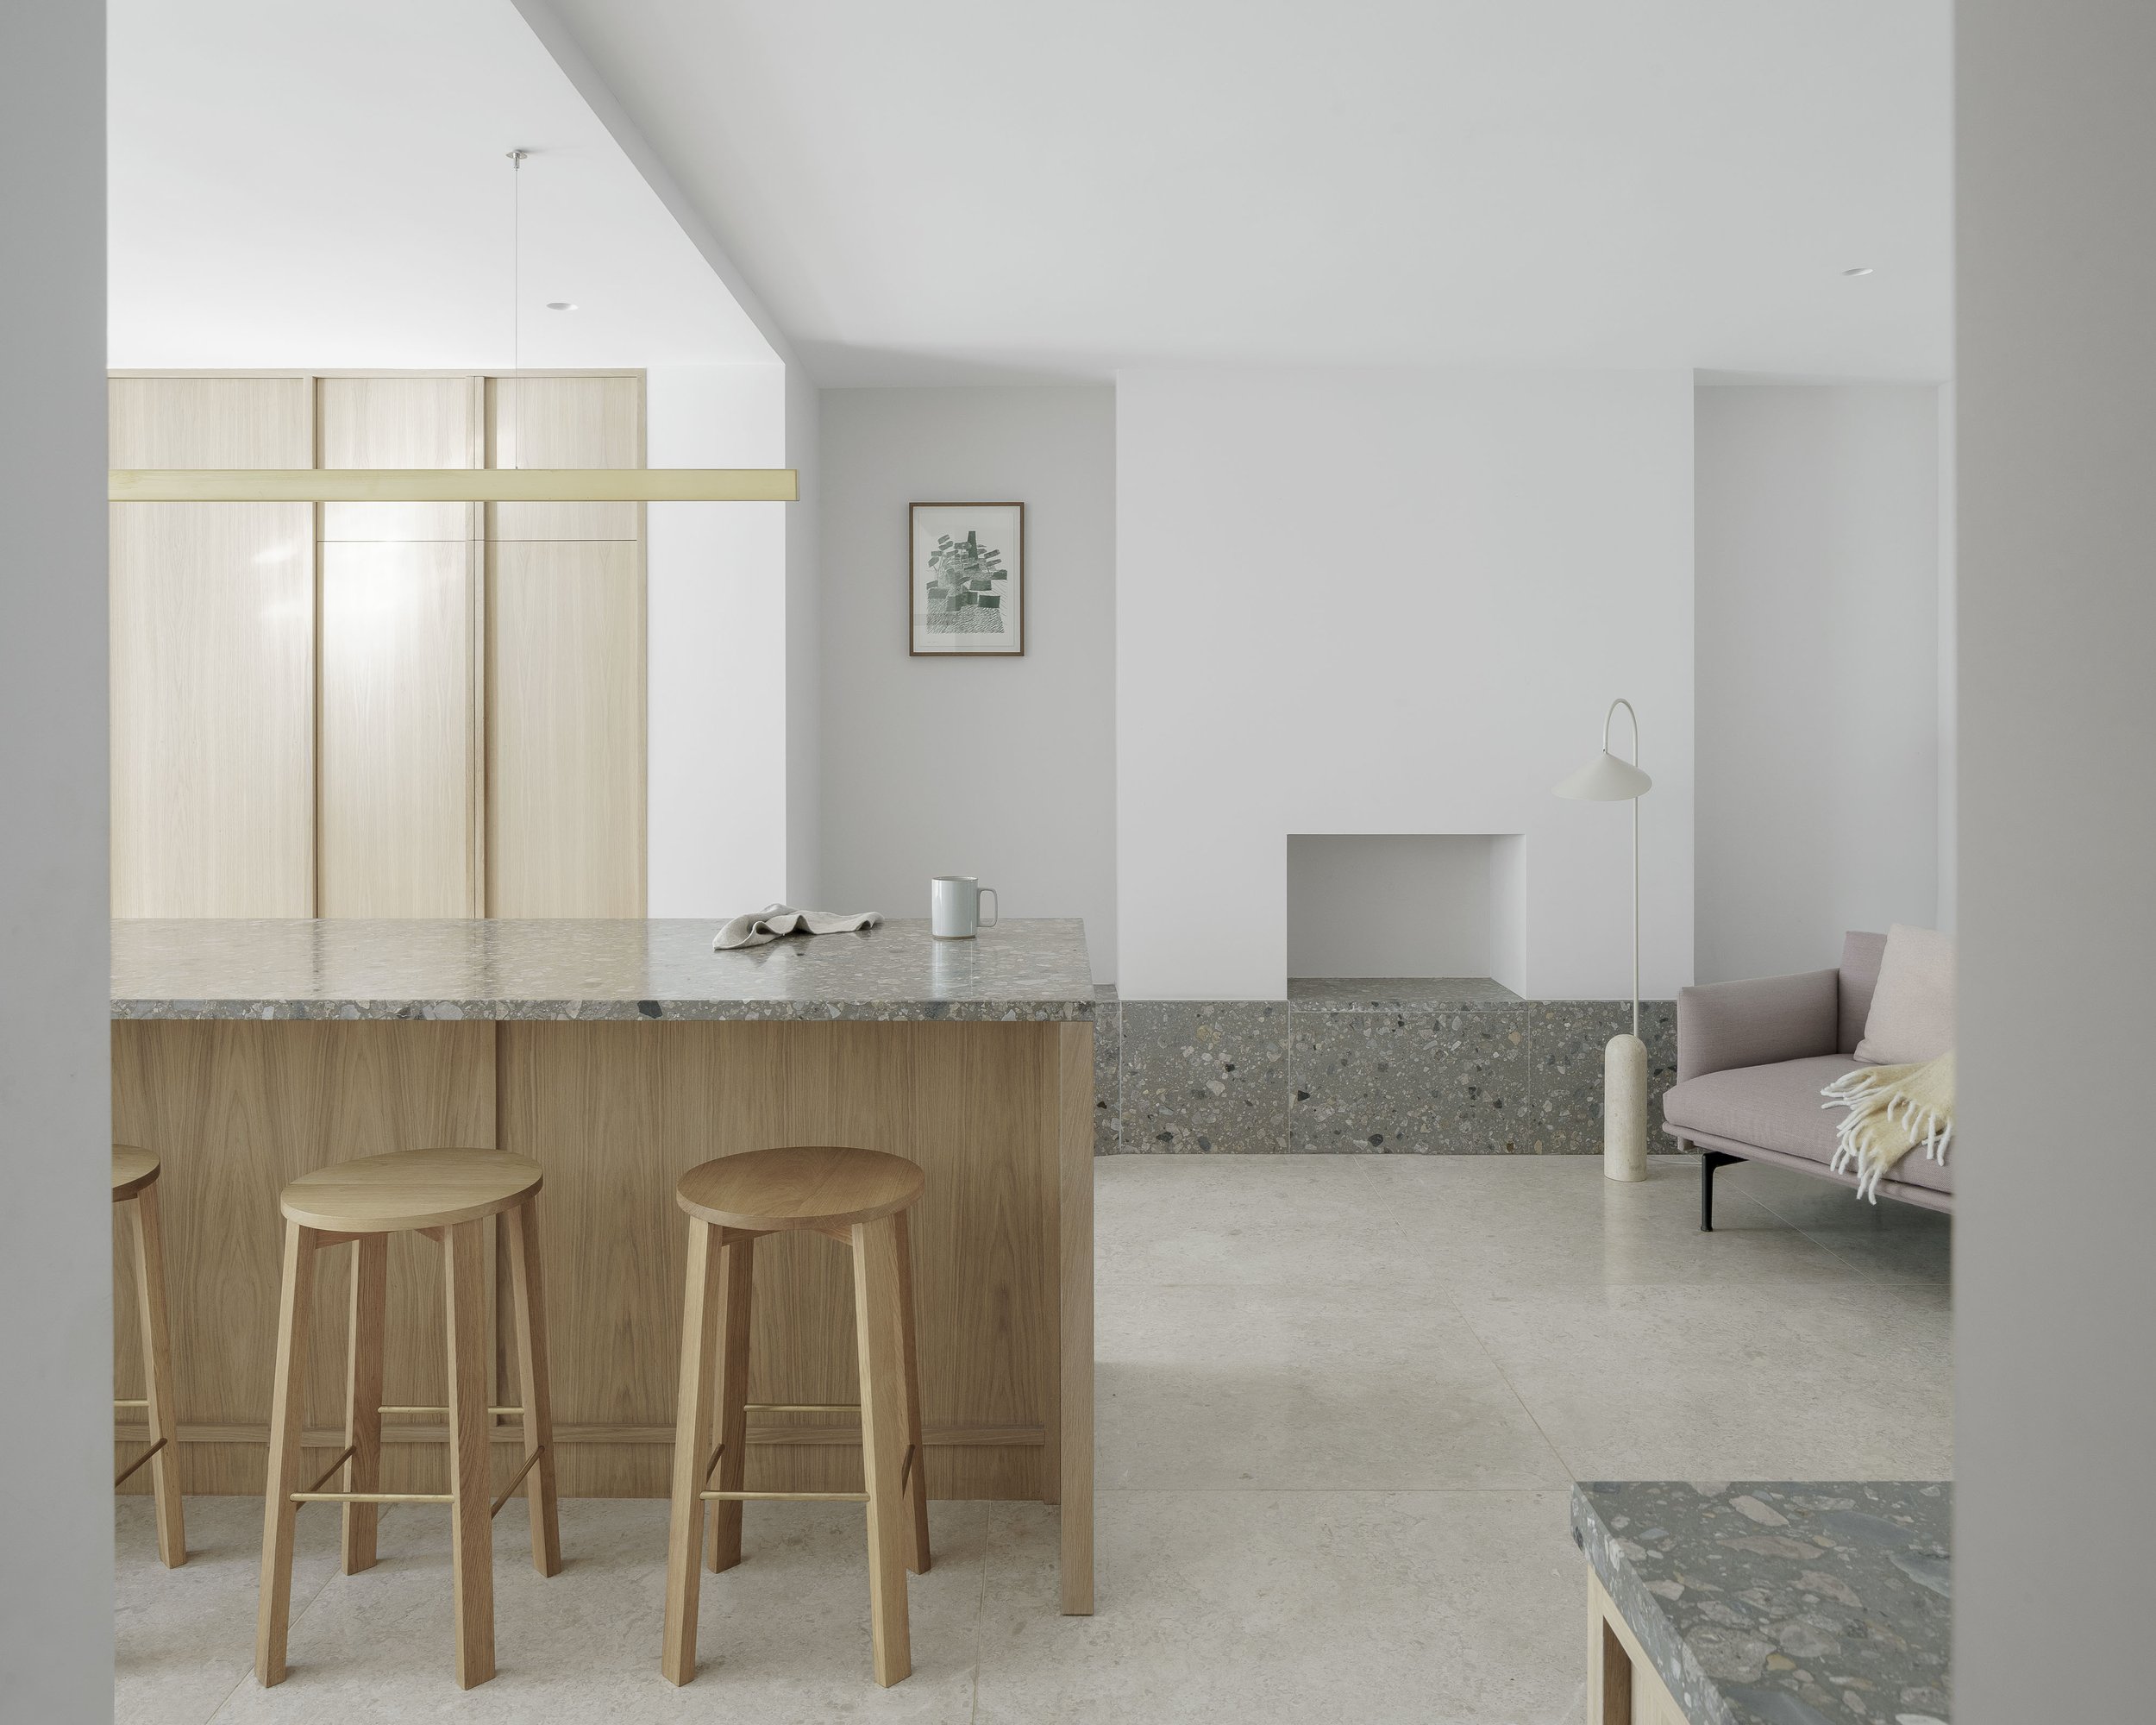 Architecture-for-London_Stone-House_Kitchen-2_Credit_Building-Narratives.jpg